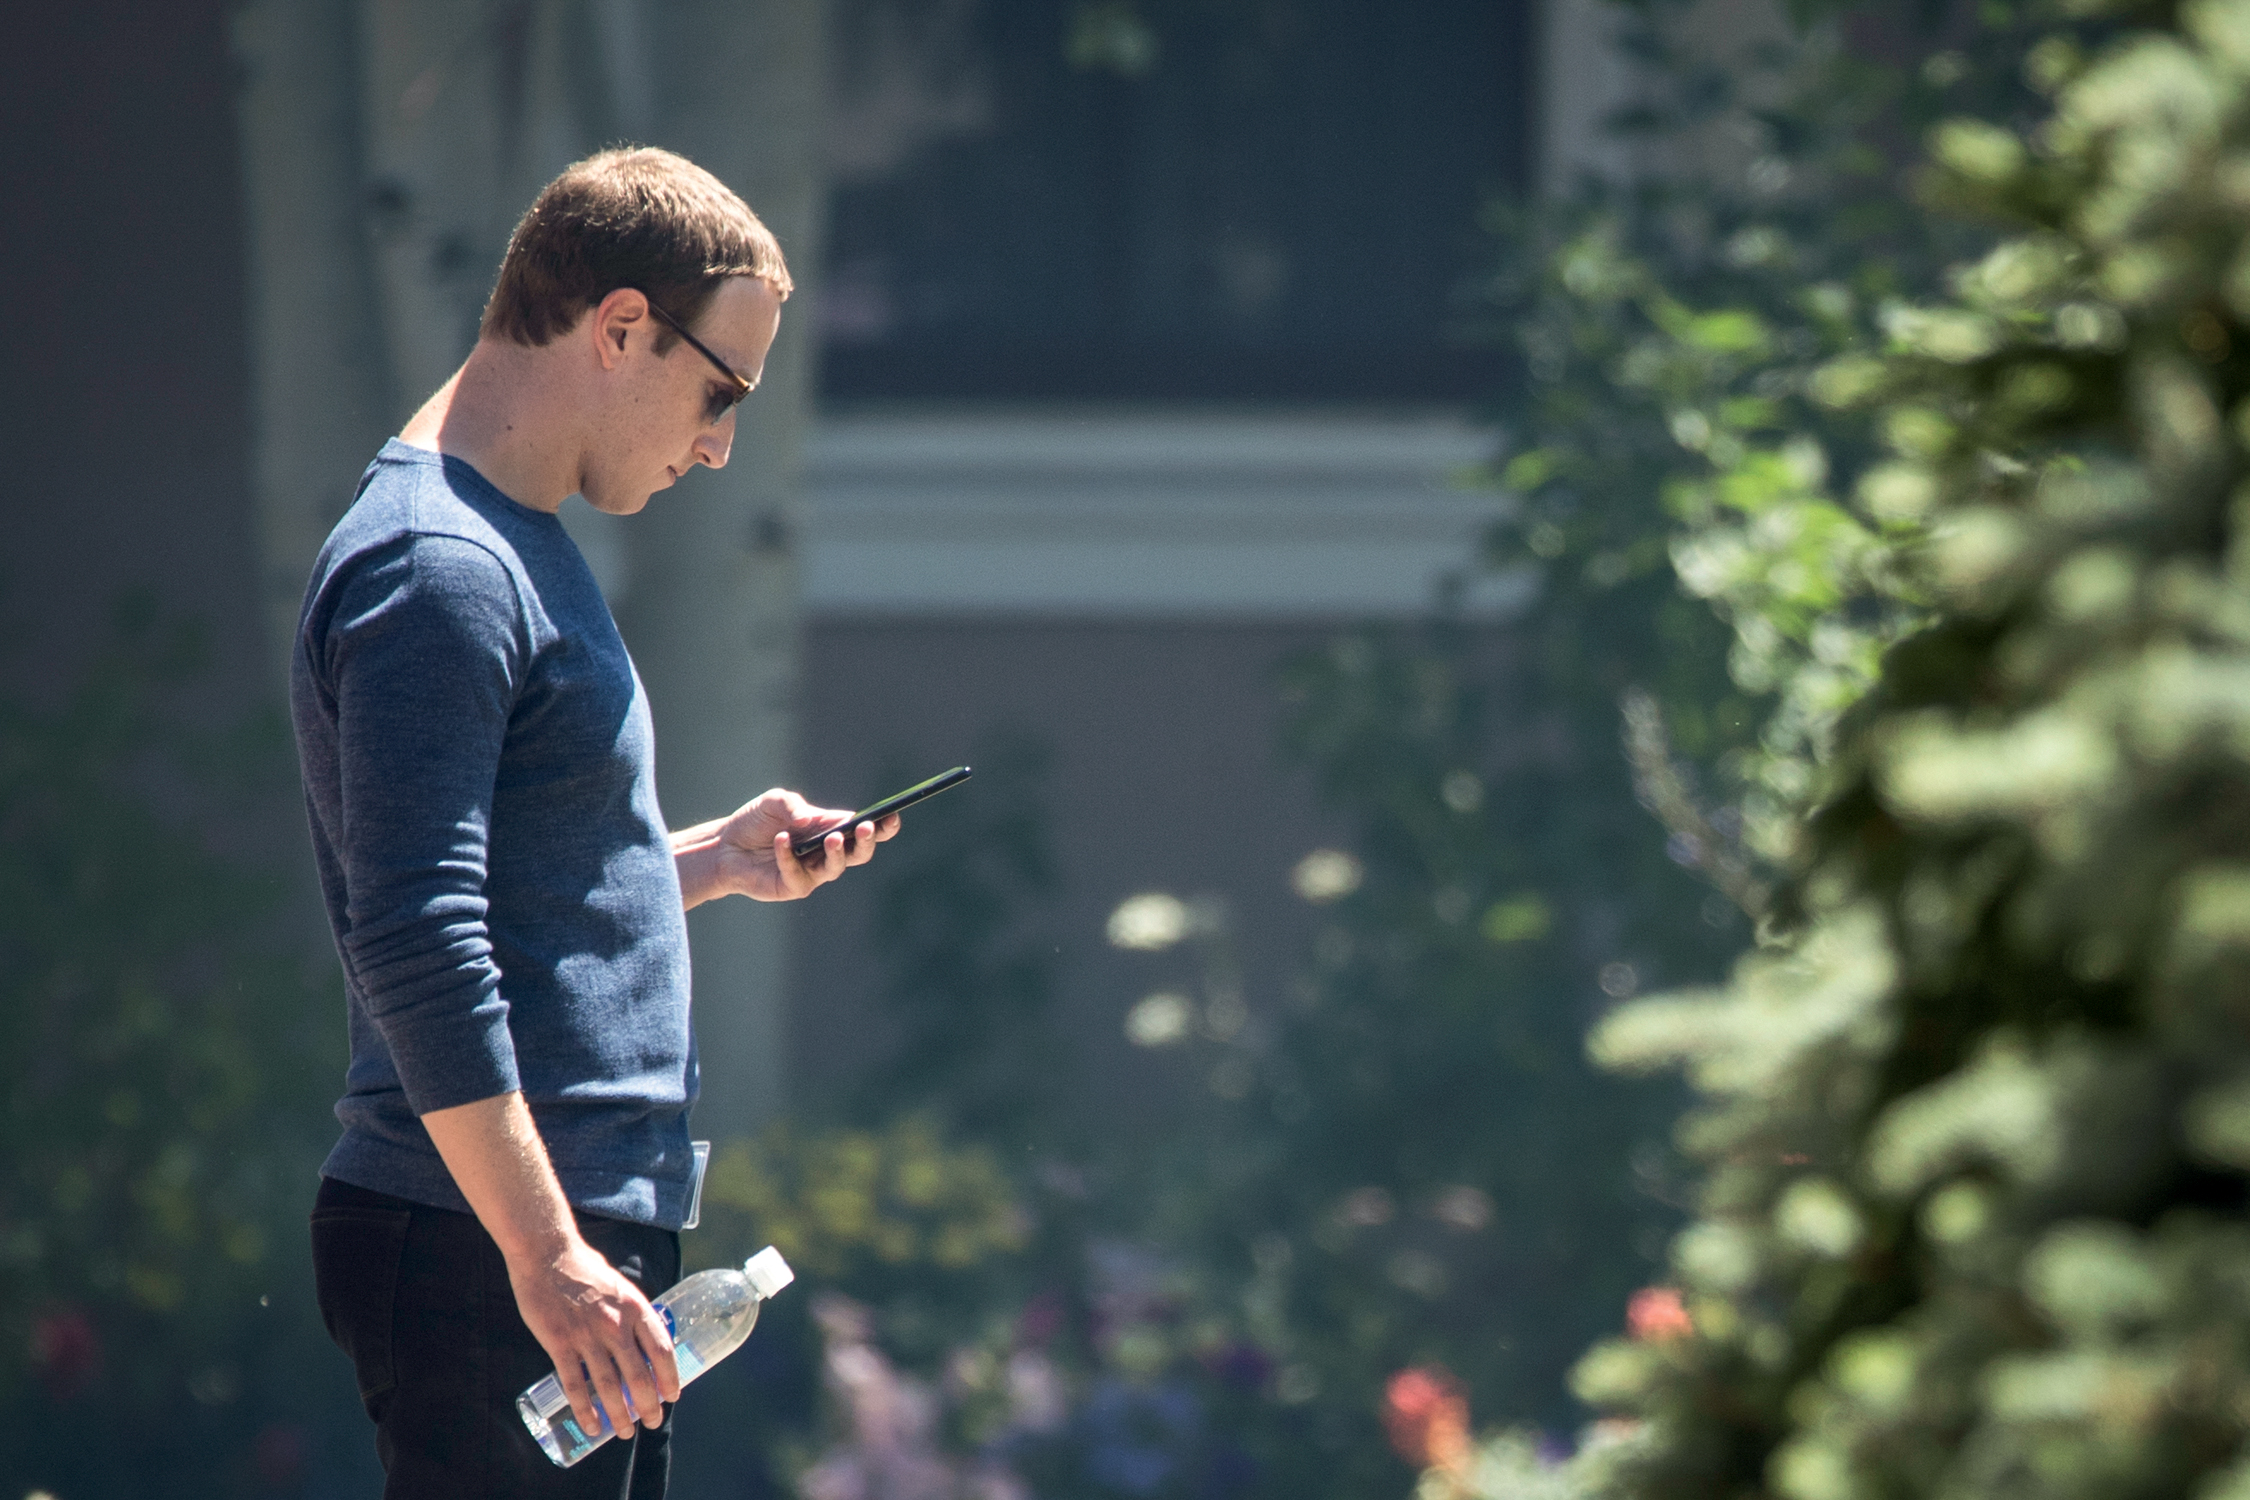 Ambitions - Zuckerberg: With the project, he wants to increase advertising revenue -